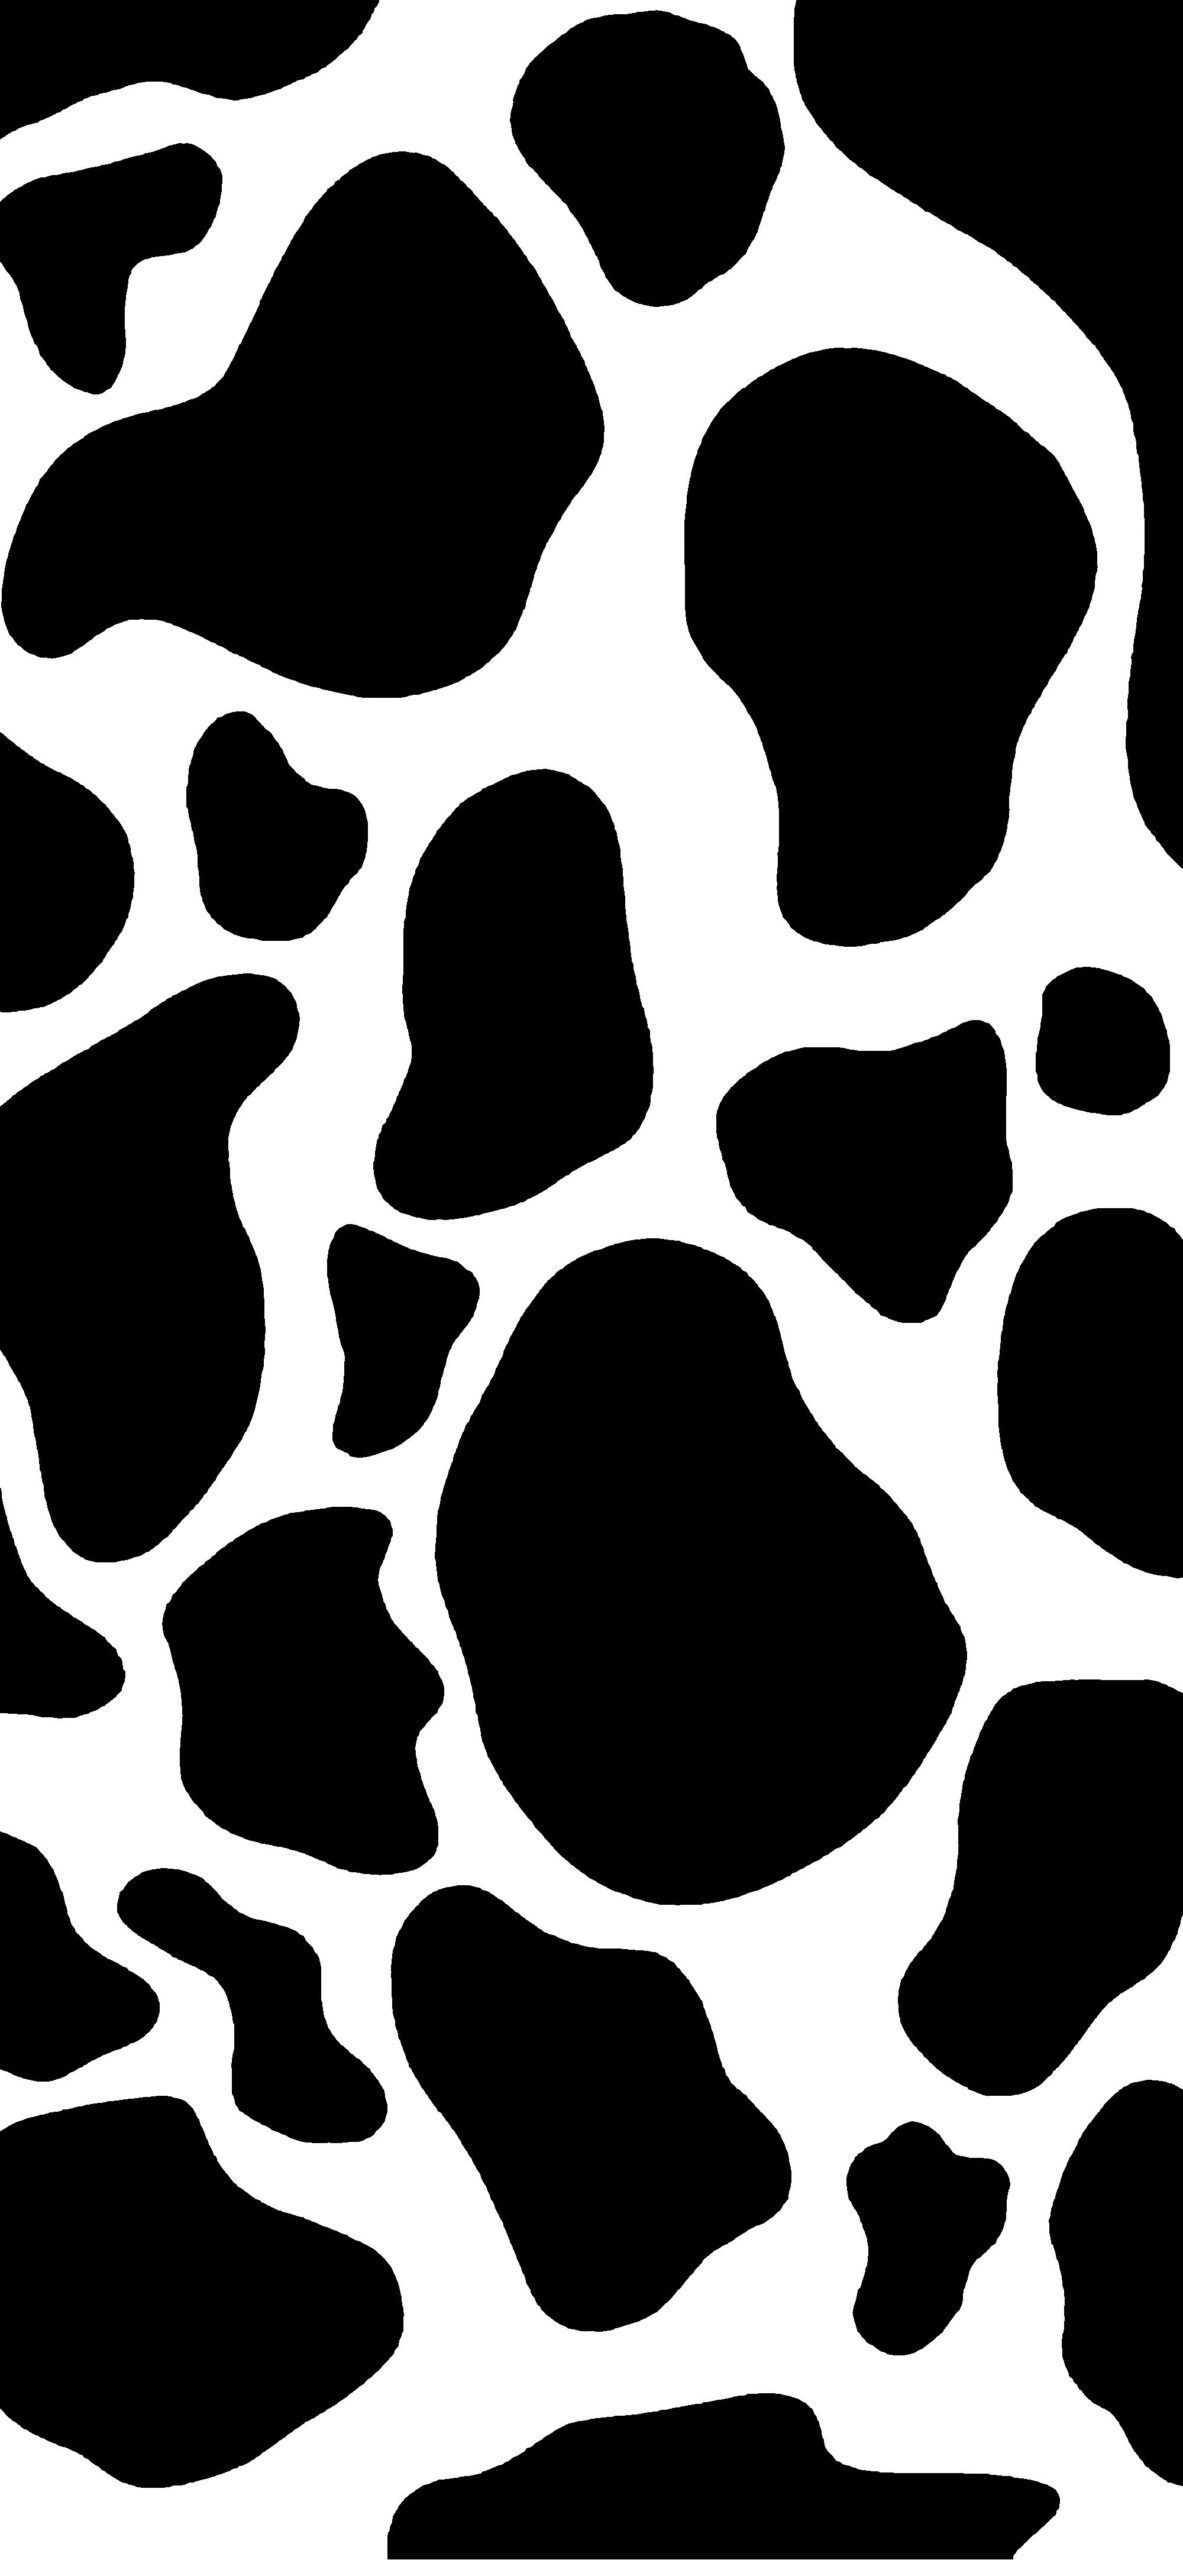 Cow Pattern Wallpaper Black And White Wallpaper for Phone